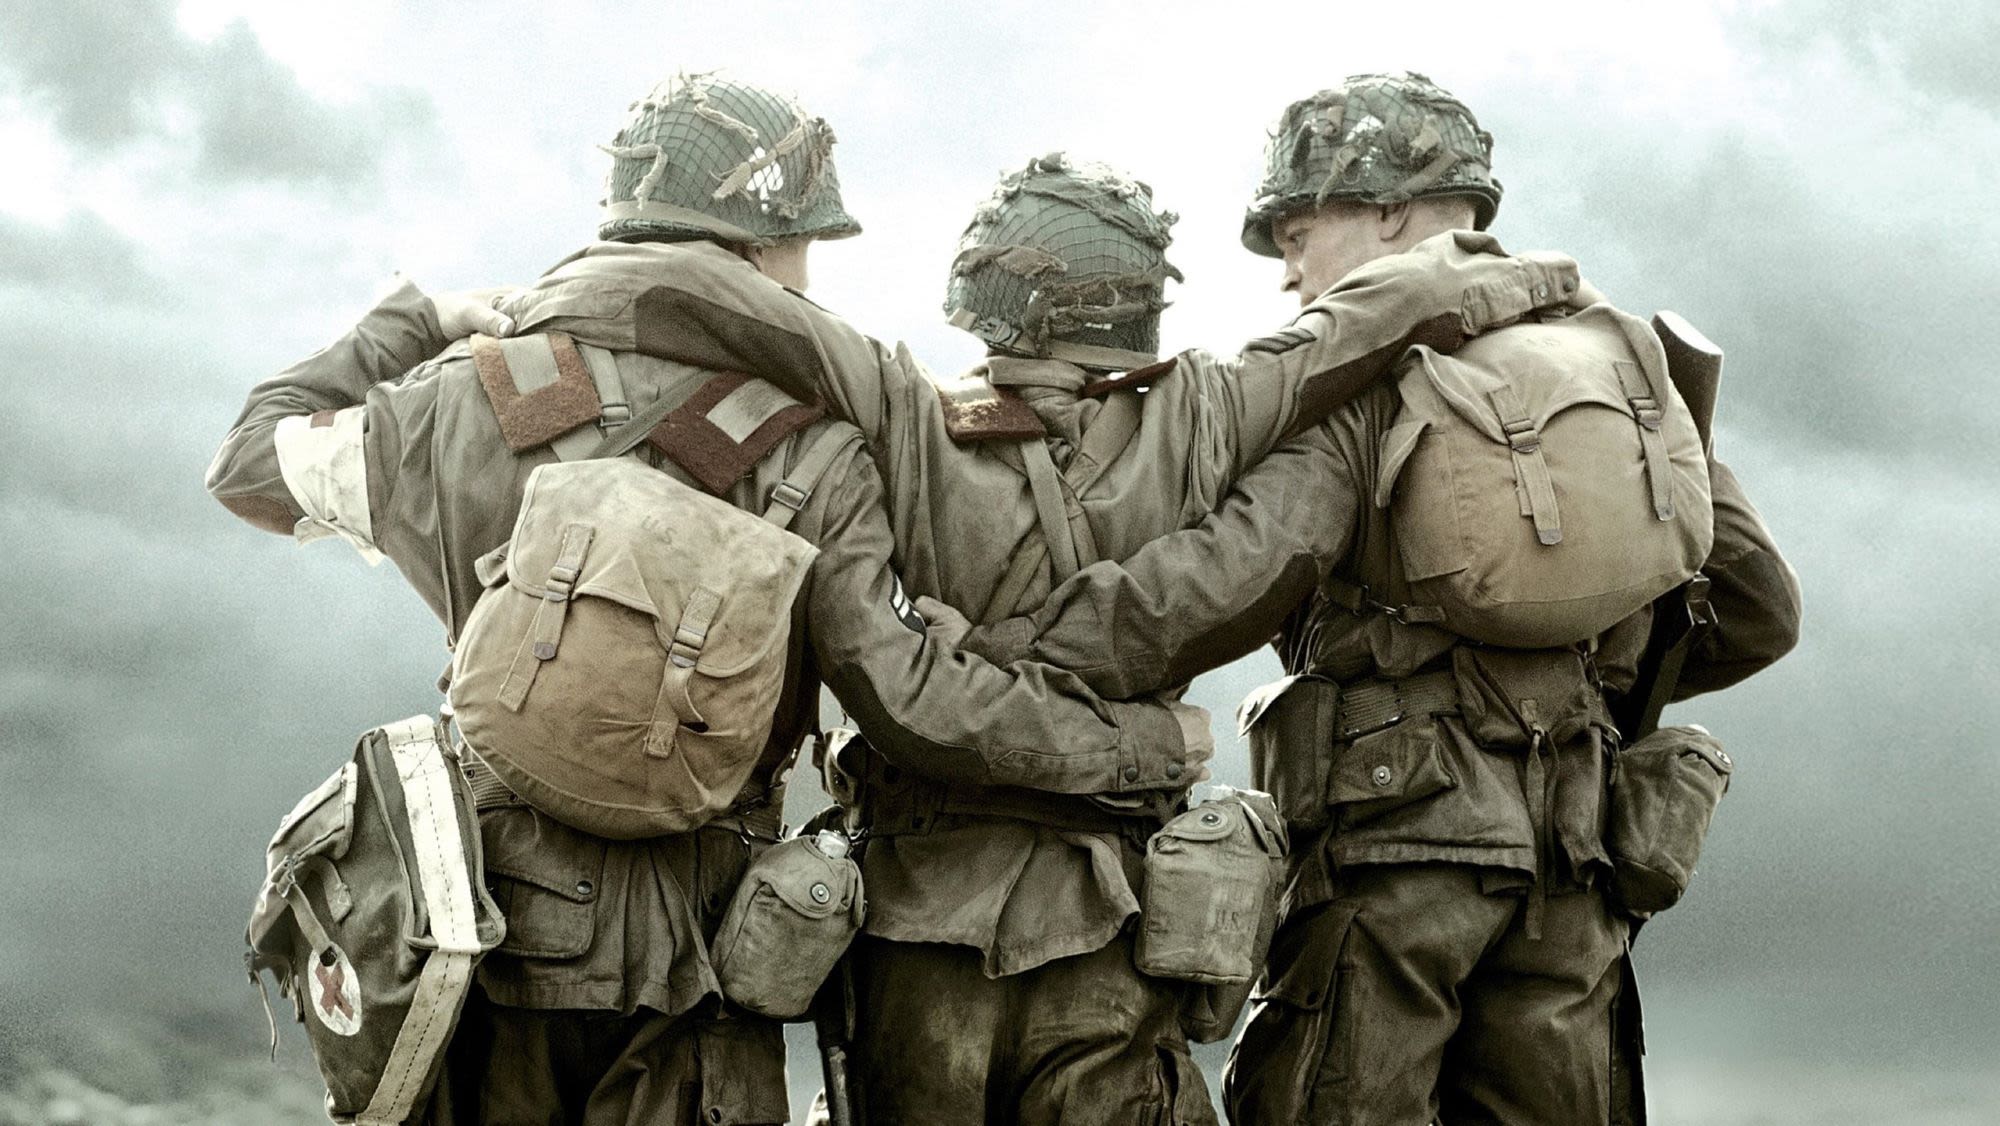 Band of Brothers Memorial Day marathon taking place on Monday, May 27